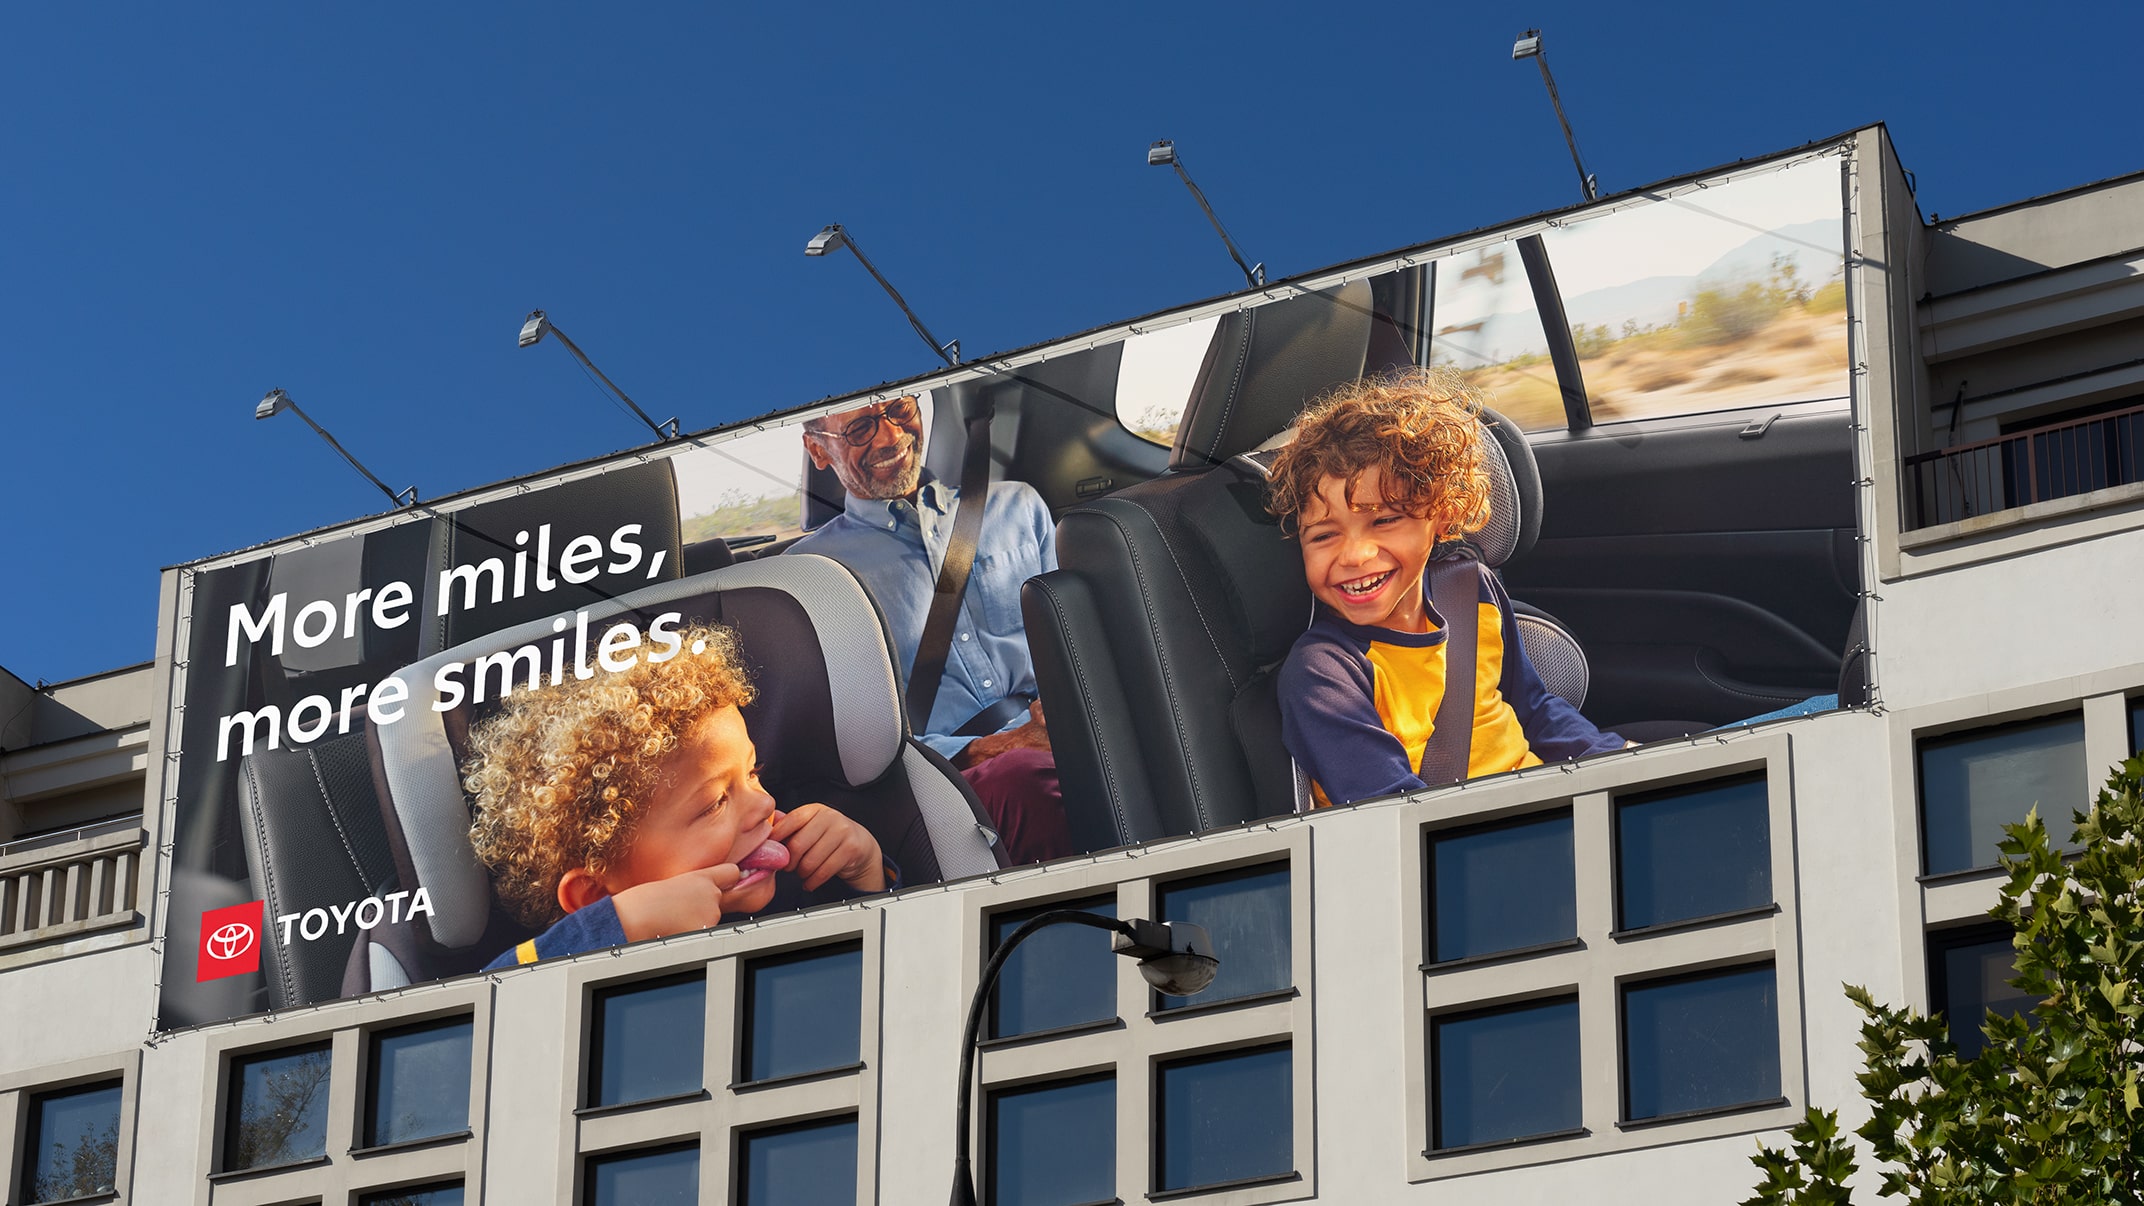 An out-of-home billboard with the Toyota logo shows a family inside their Grand Highlander. The headline reads “More miles, more smiles.”